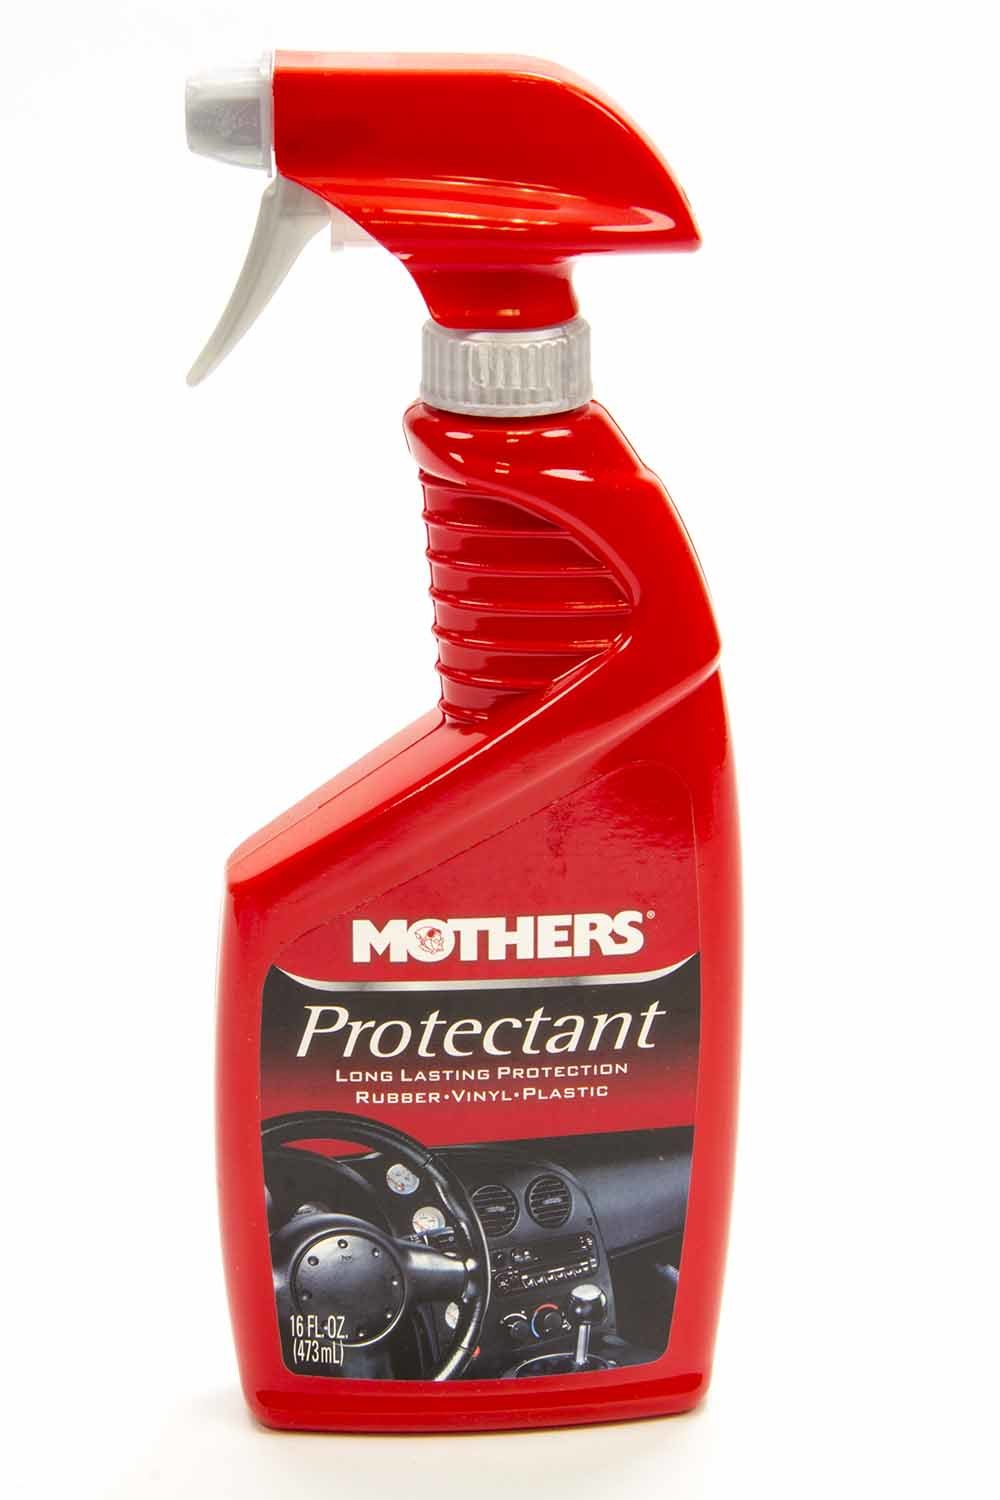 MOTHERS Interior Protectant, Protectant, 16 oz Bottle, Each